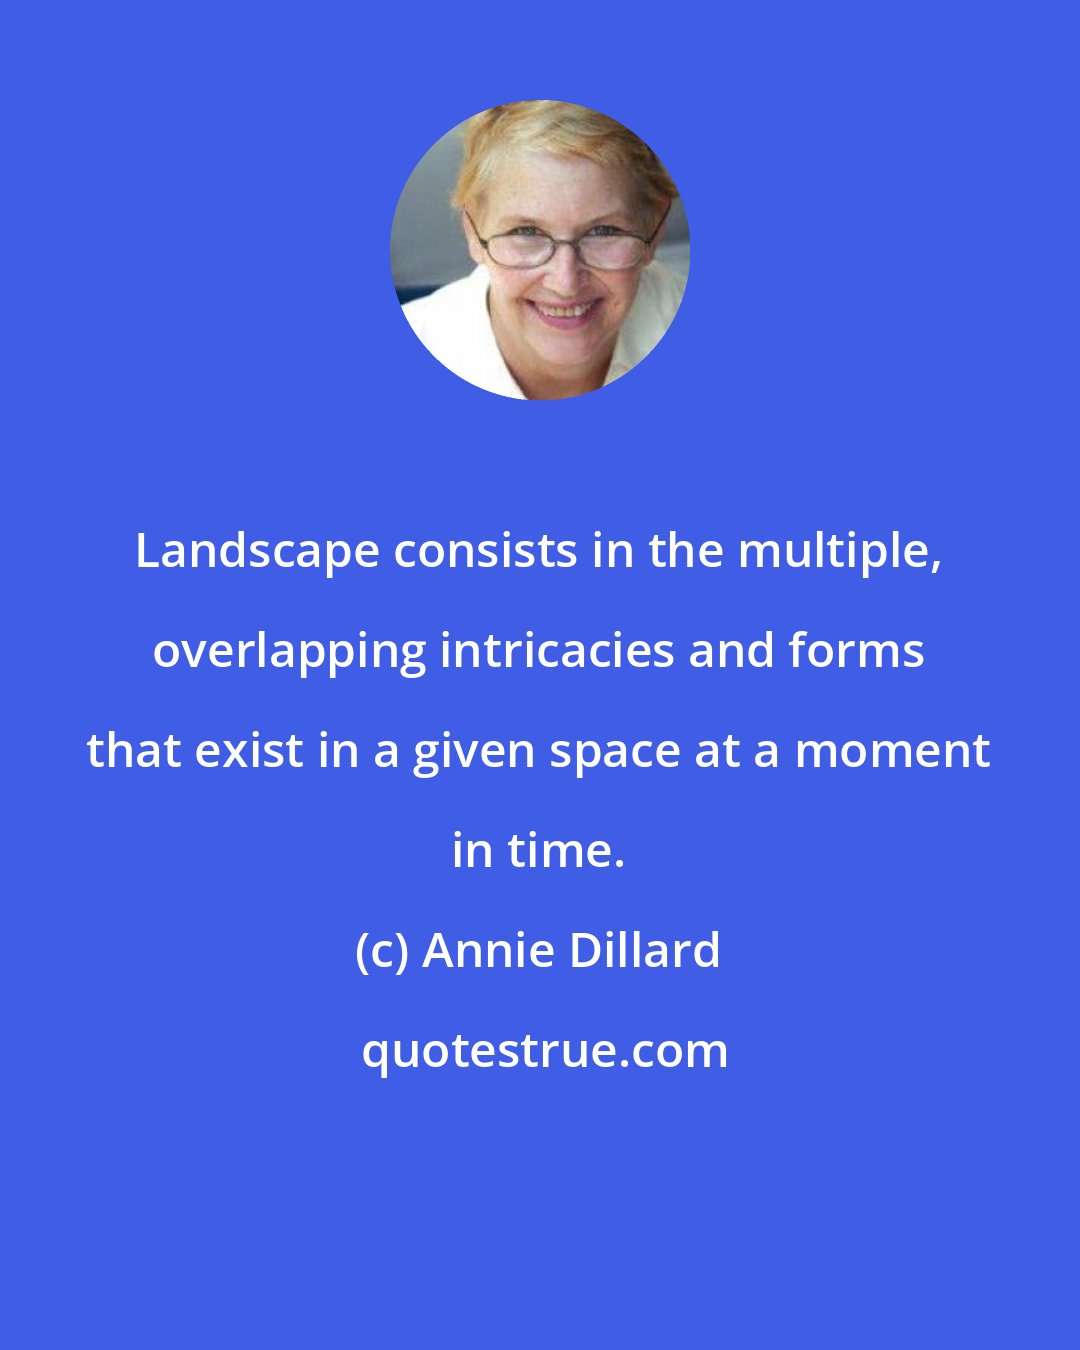 Annie Dillard: Landscape consists in the multiple, overlapping intricacies and forms that exist in a given space at a moment in time.